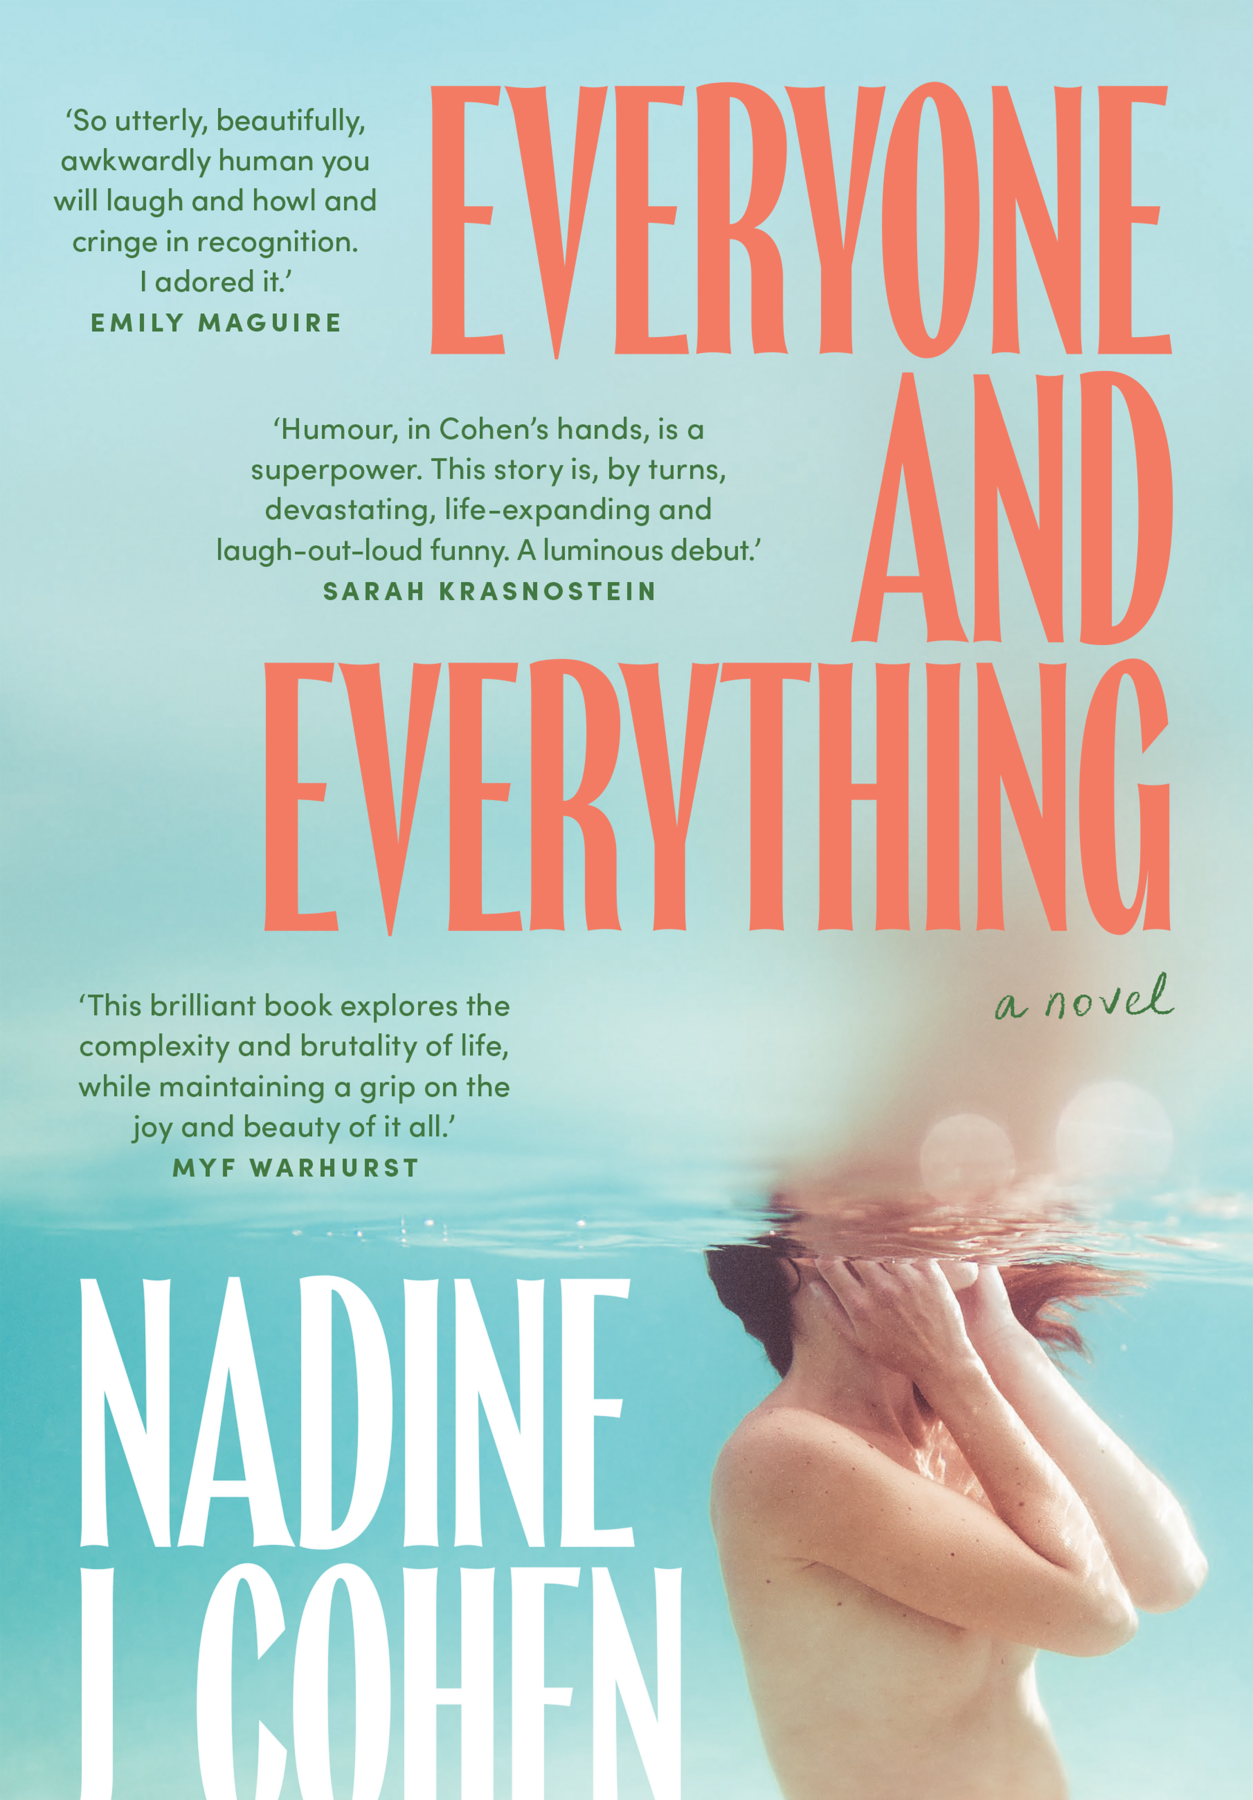 A blue book cover featuring a naked woman underwater, her face the the top of her head above the water and out of focus. The title is in large orange lettering covering the top right quadrant of the book and the author's name in white in the opposite corner